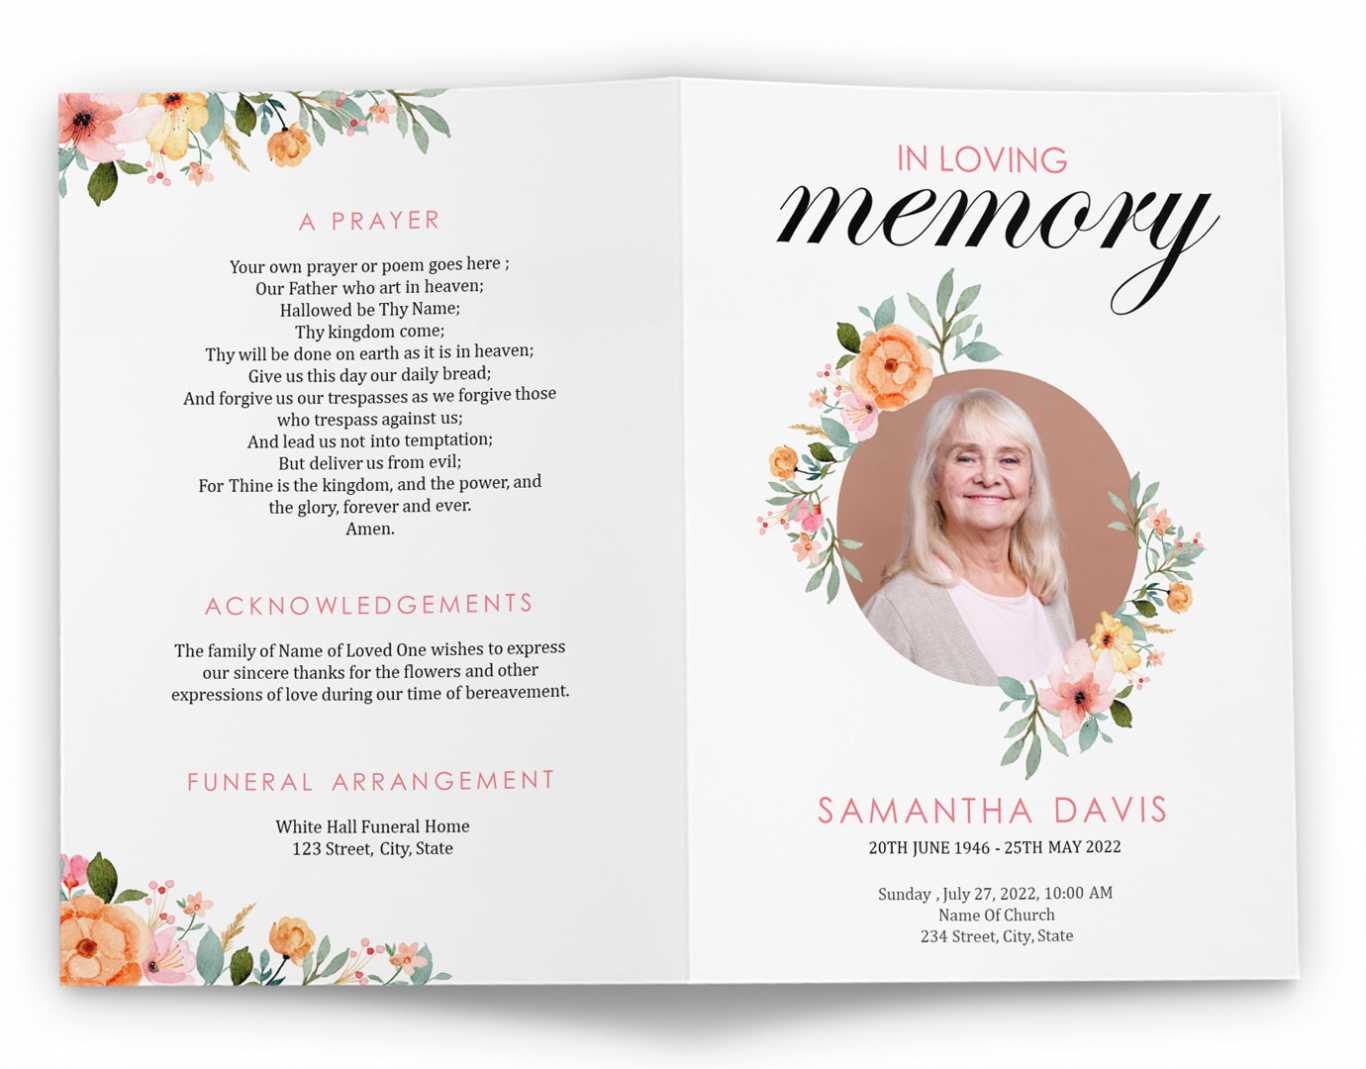 Funeral Pamphlet Template For Women throughout Funeral Flyer Template